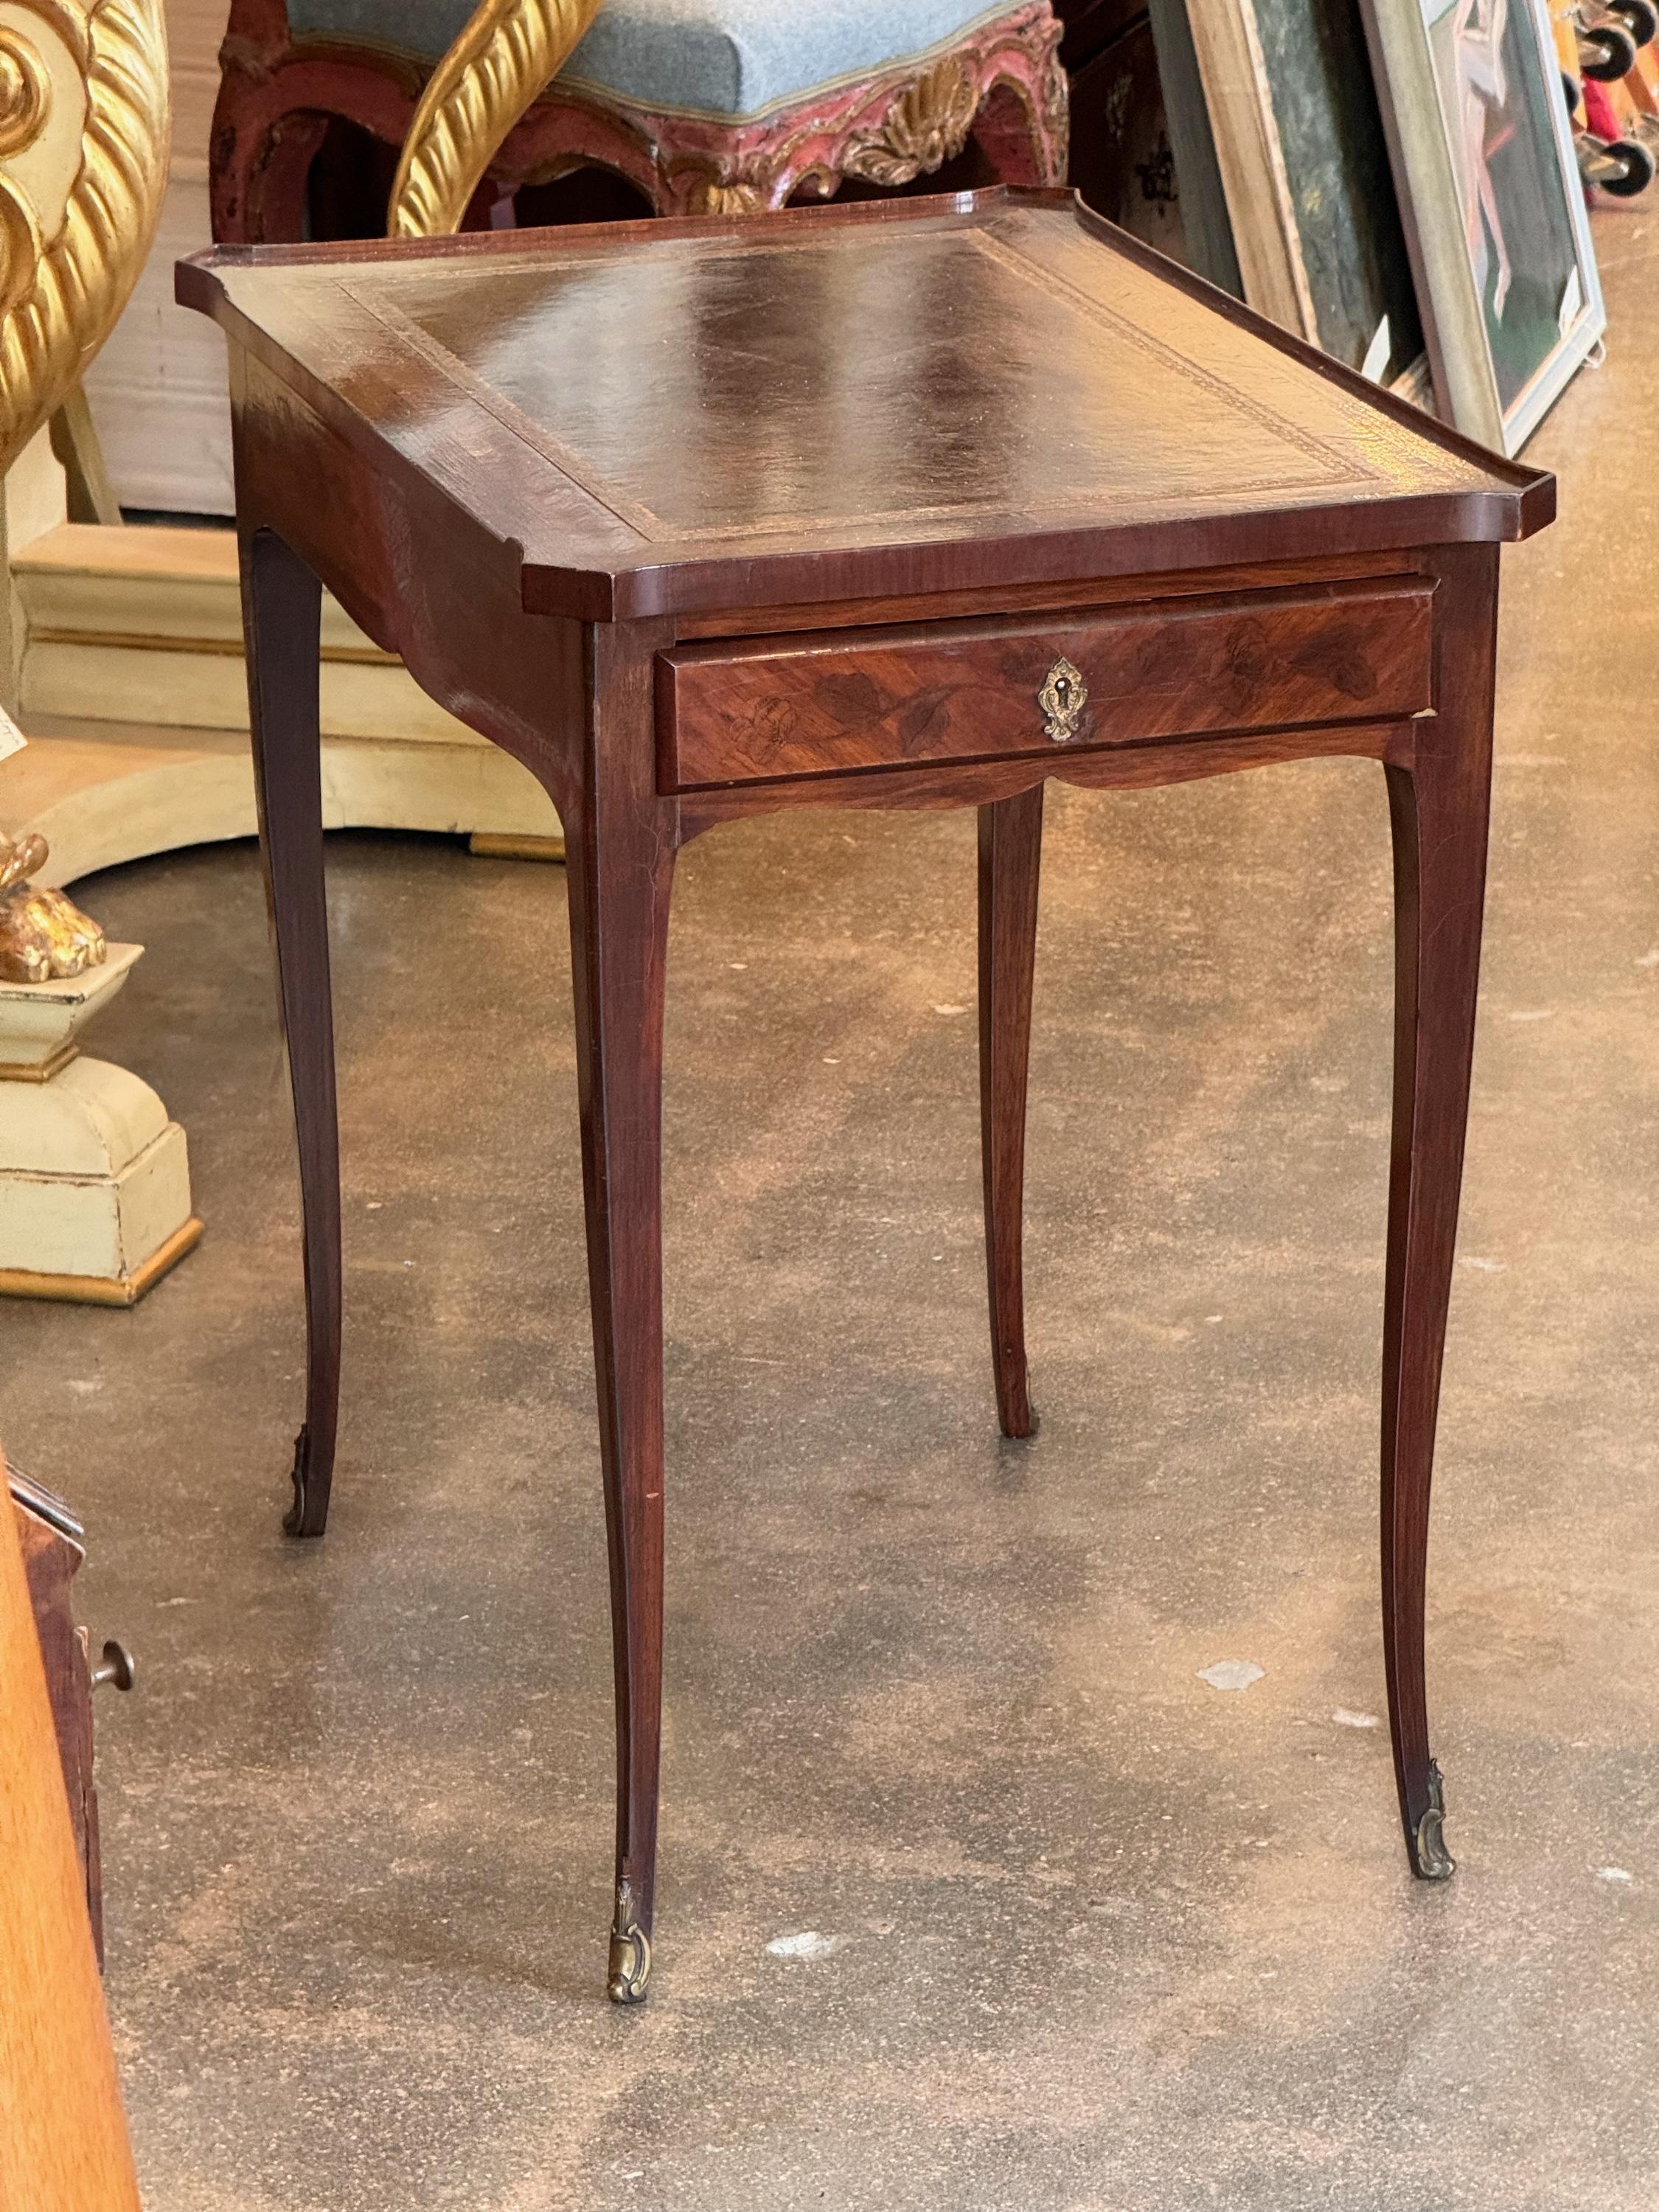 A lovely side table. It has a drawer.